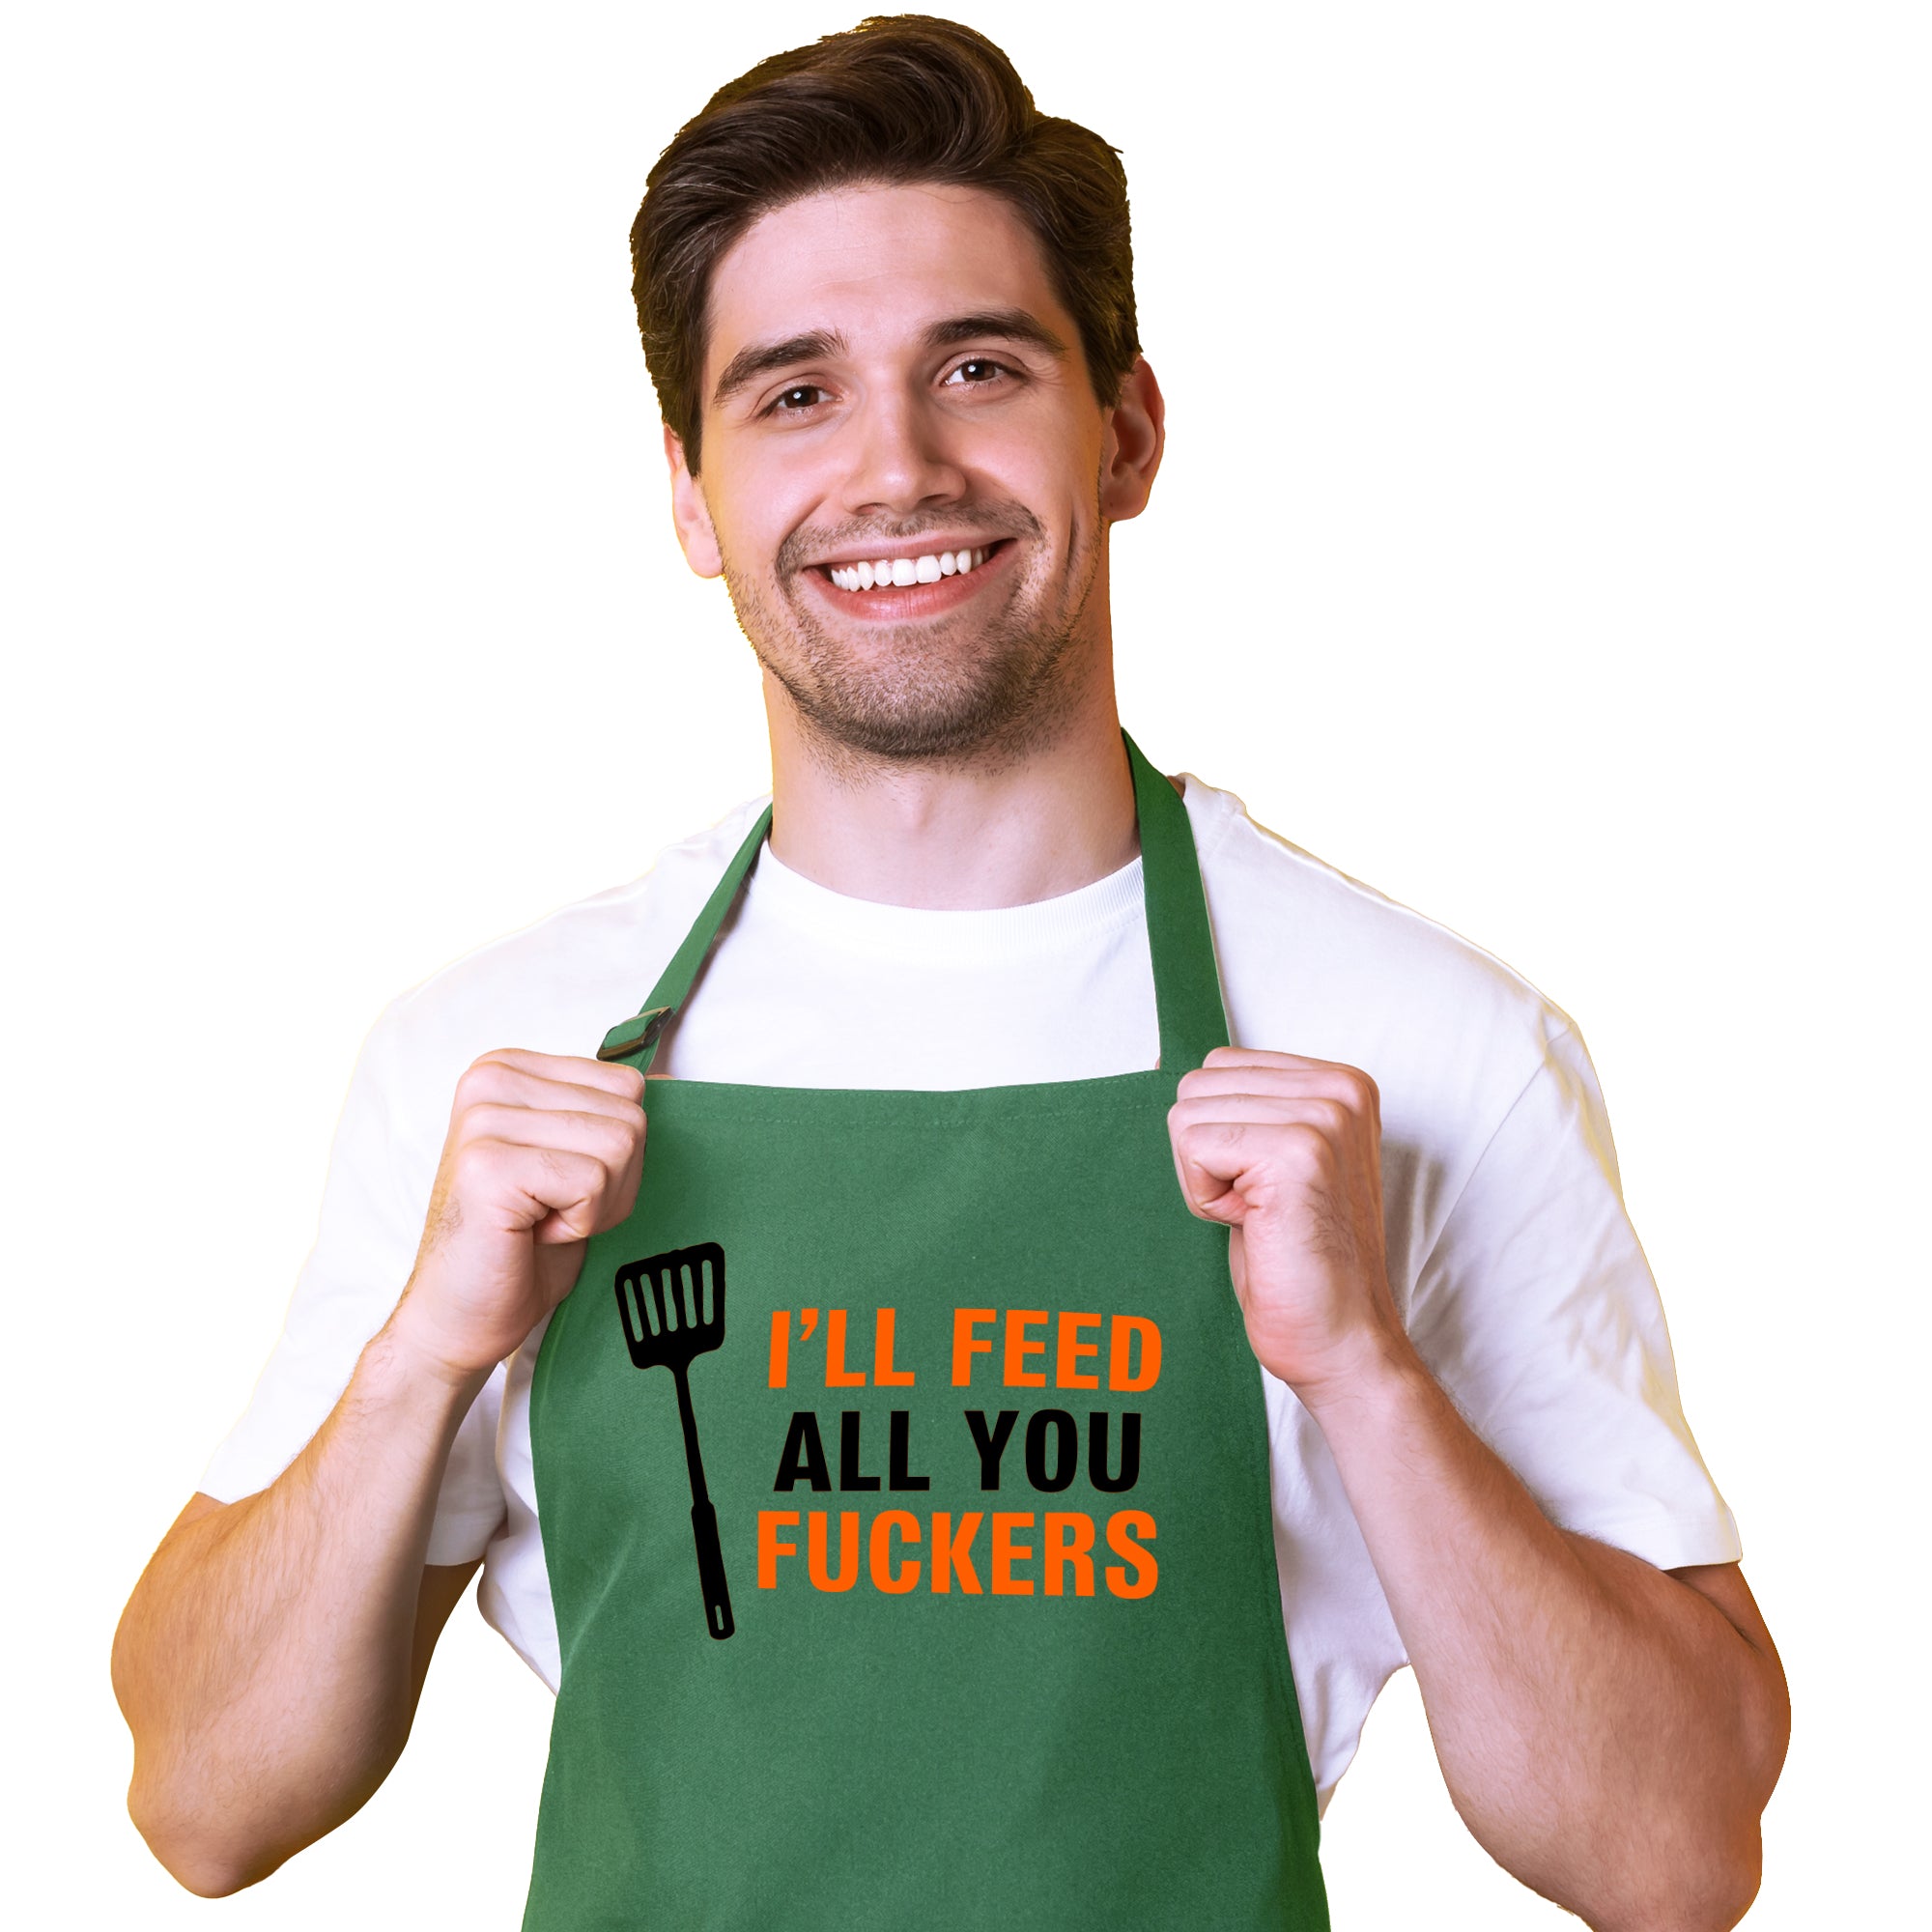 Personalized Men's Apron - Custom Cooking Apron, Great for Dad, Brother or Boyfriend - I'll Feed you All